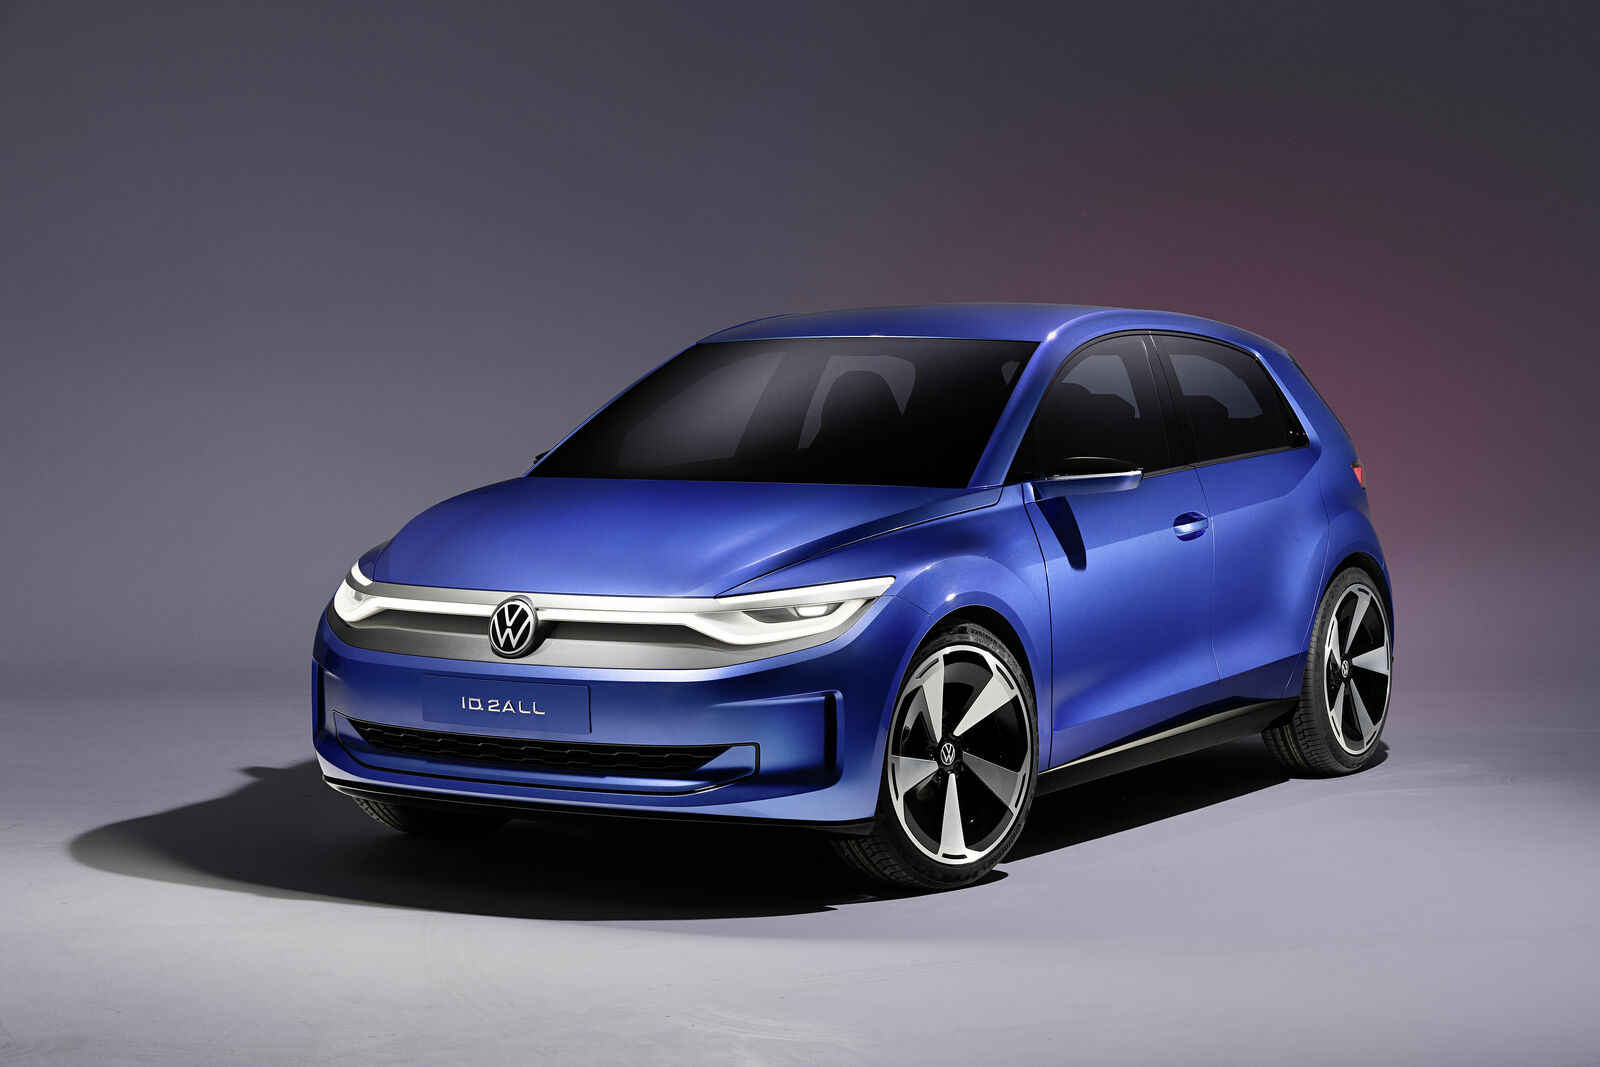 Volkswagen presents new low-price electric car, ID.2all – EQ Mag